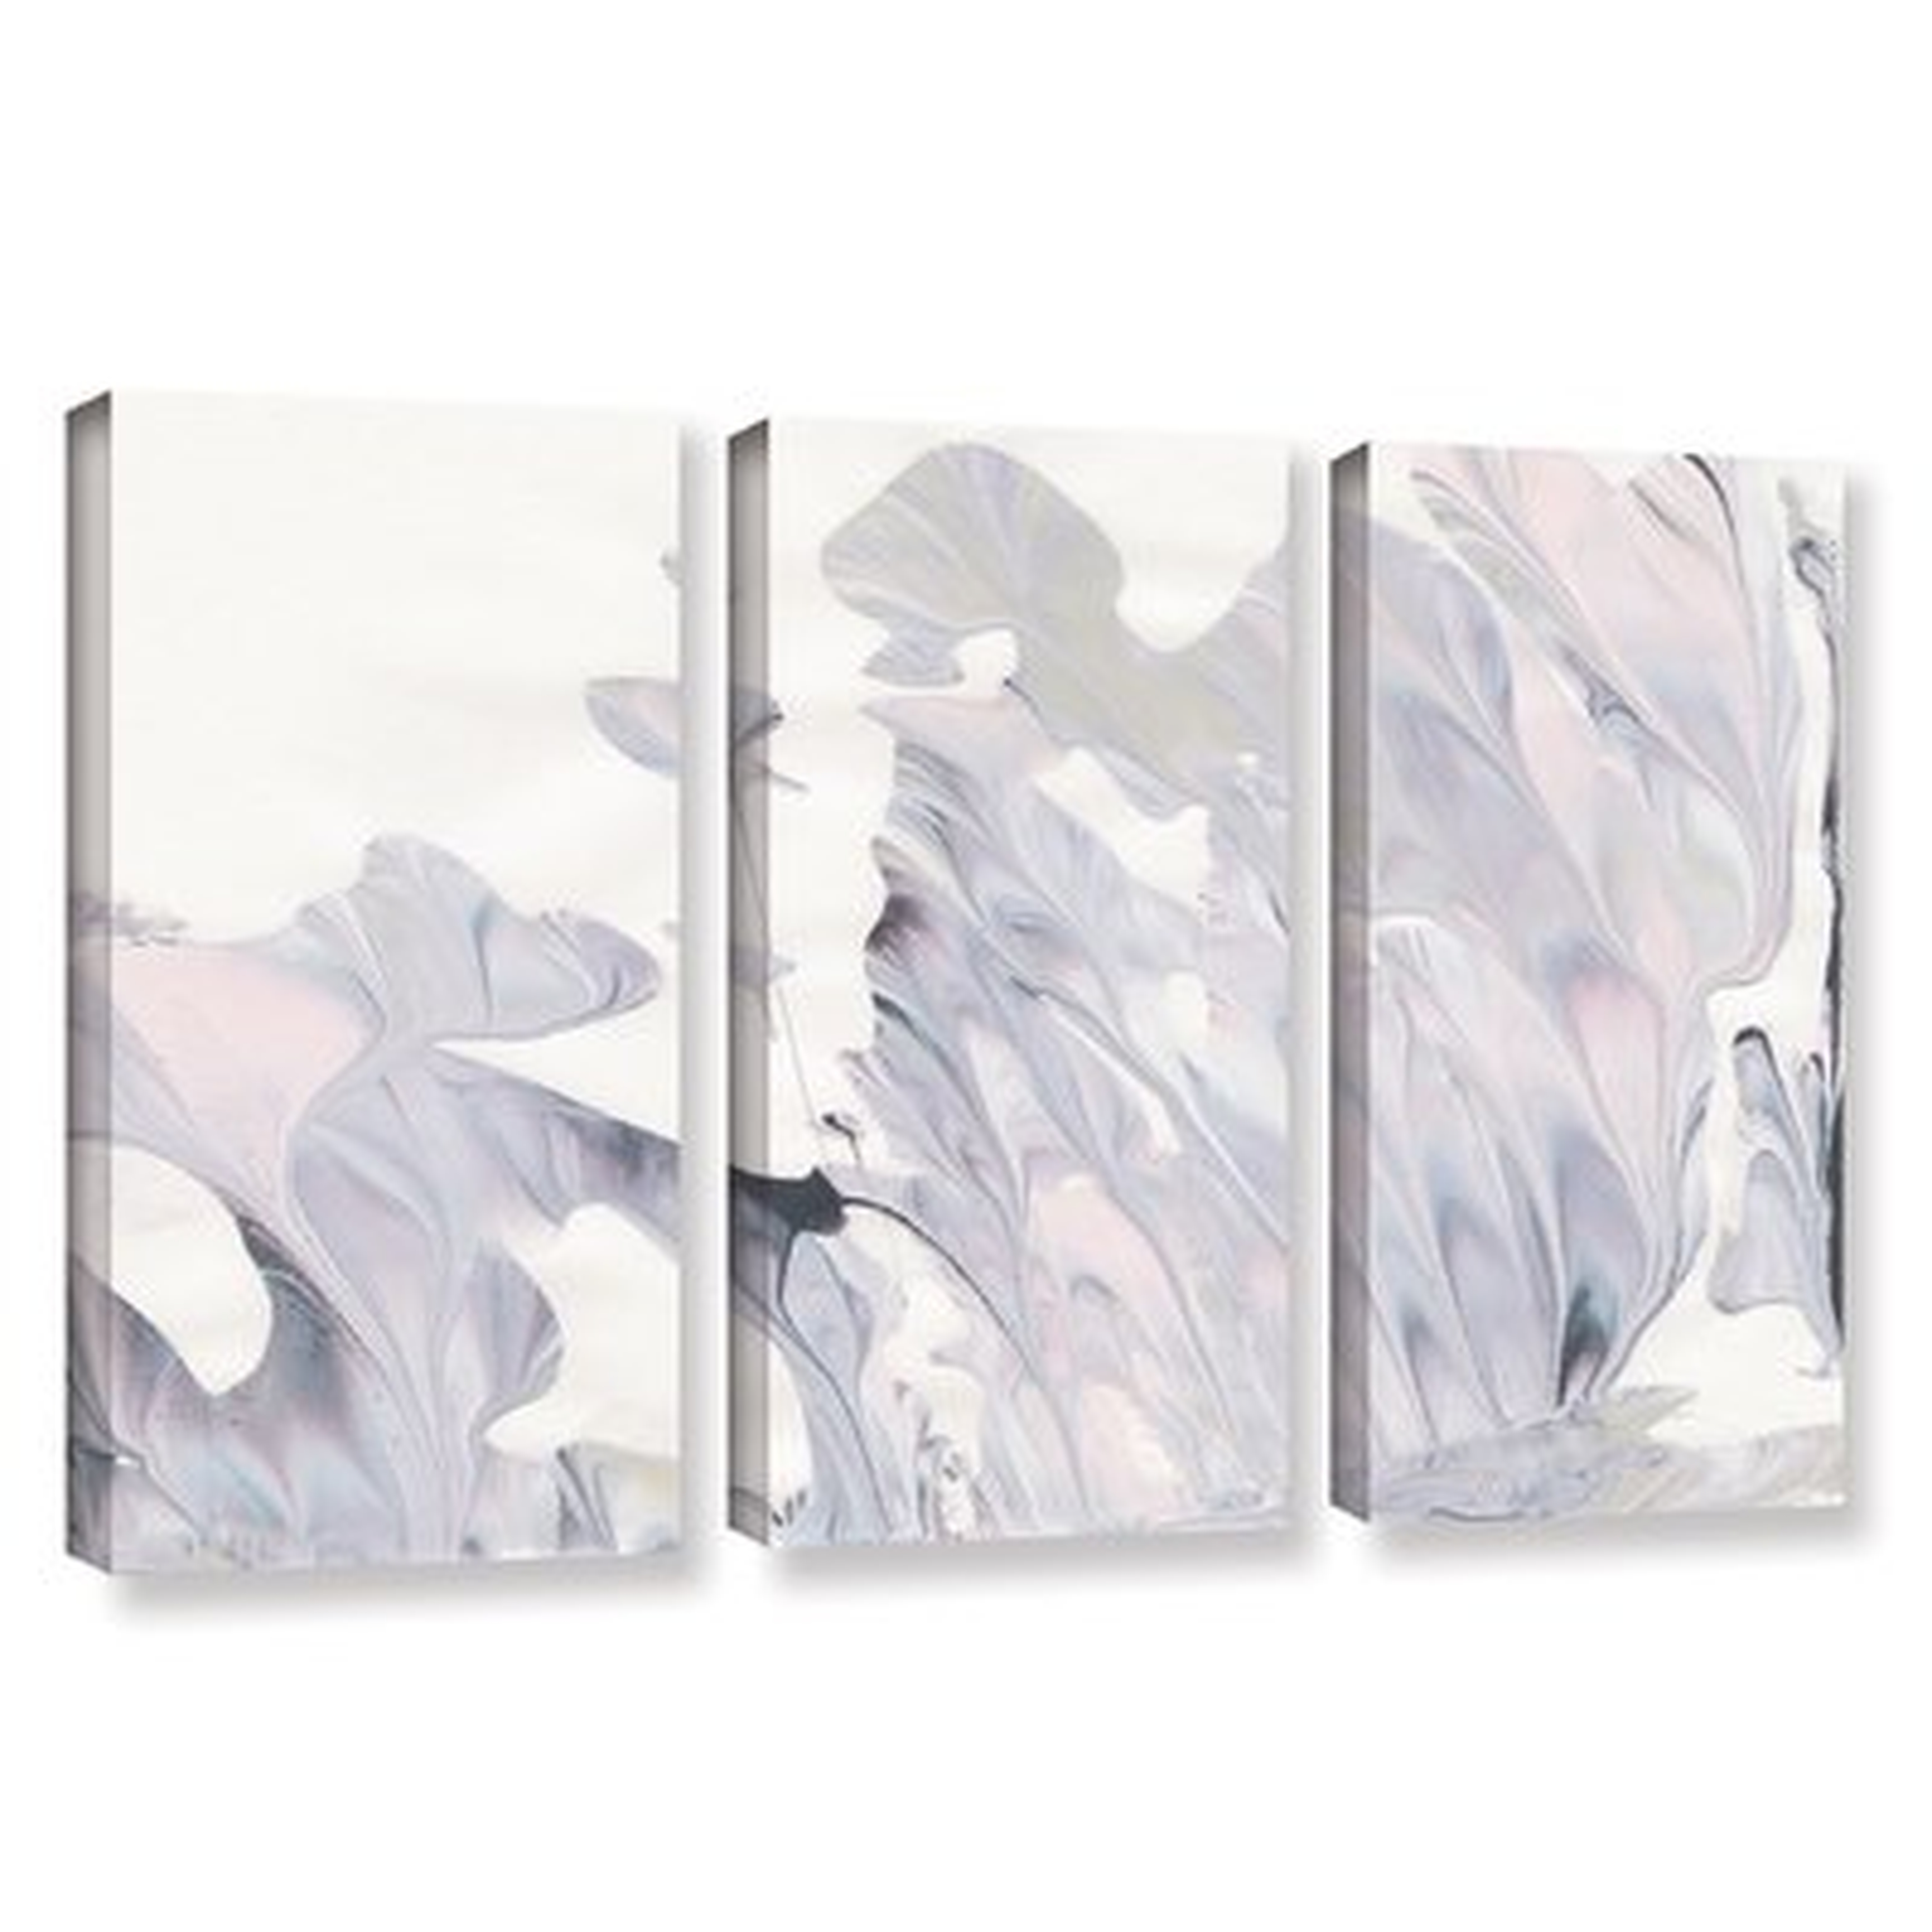 'Marbling II' Graphic Art Print Multi-Piece Image on Wrapped Canvas - Wayfair